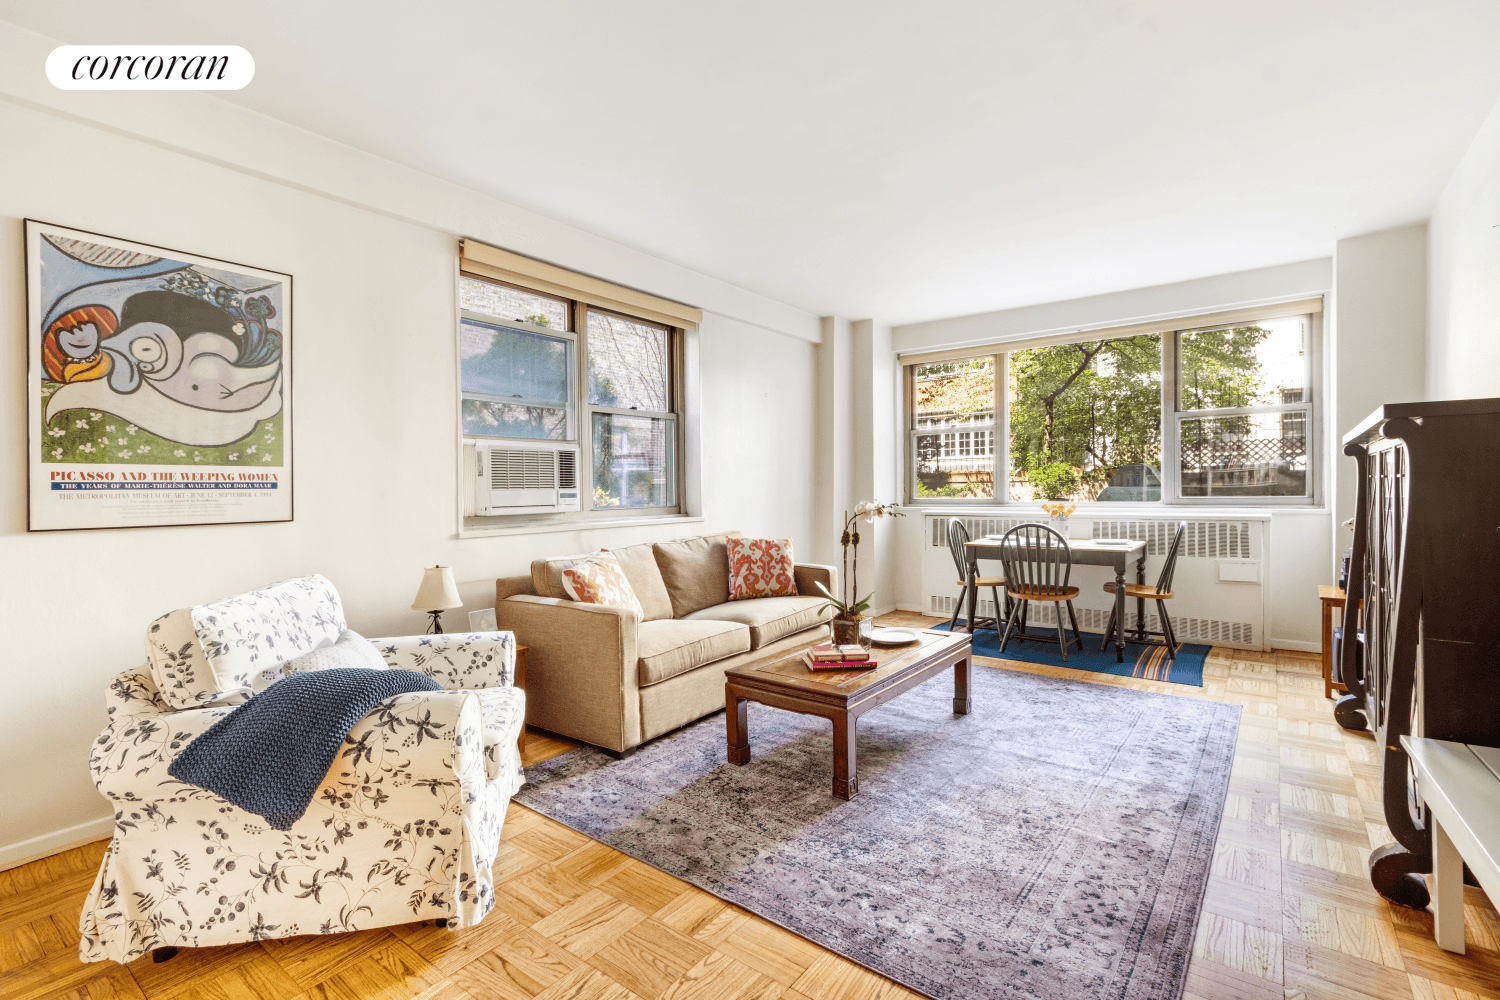 A spacious one bedroom Upper East Side home near Carl Schurz Park is now on the market.